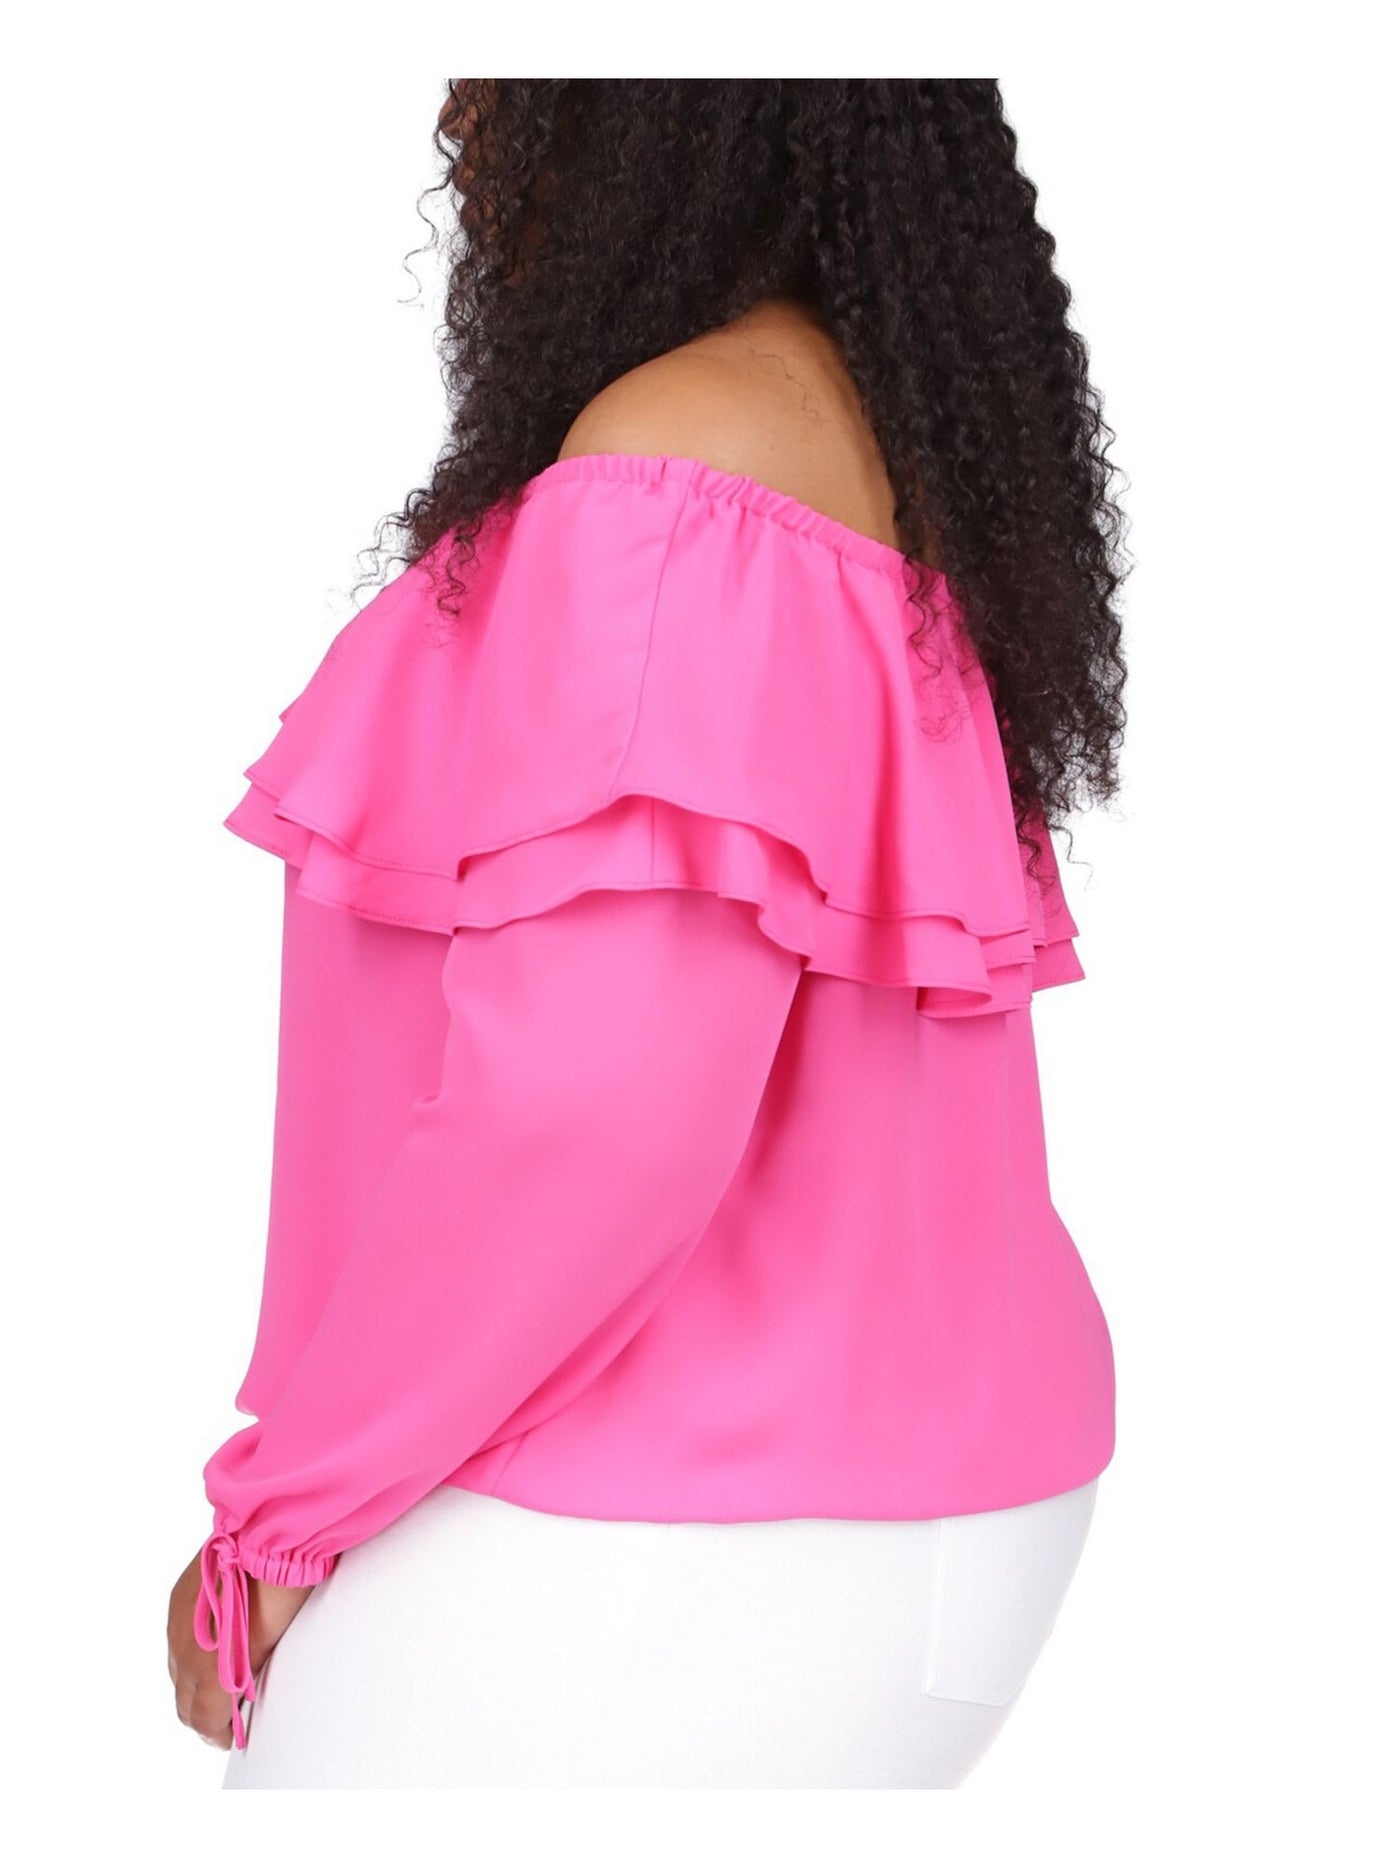 MICHAEL KORS Womens Pink Ruffled Tie Elastic Cuffs Long Sleeve Off Shoulder Party Top Plus 0X